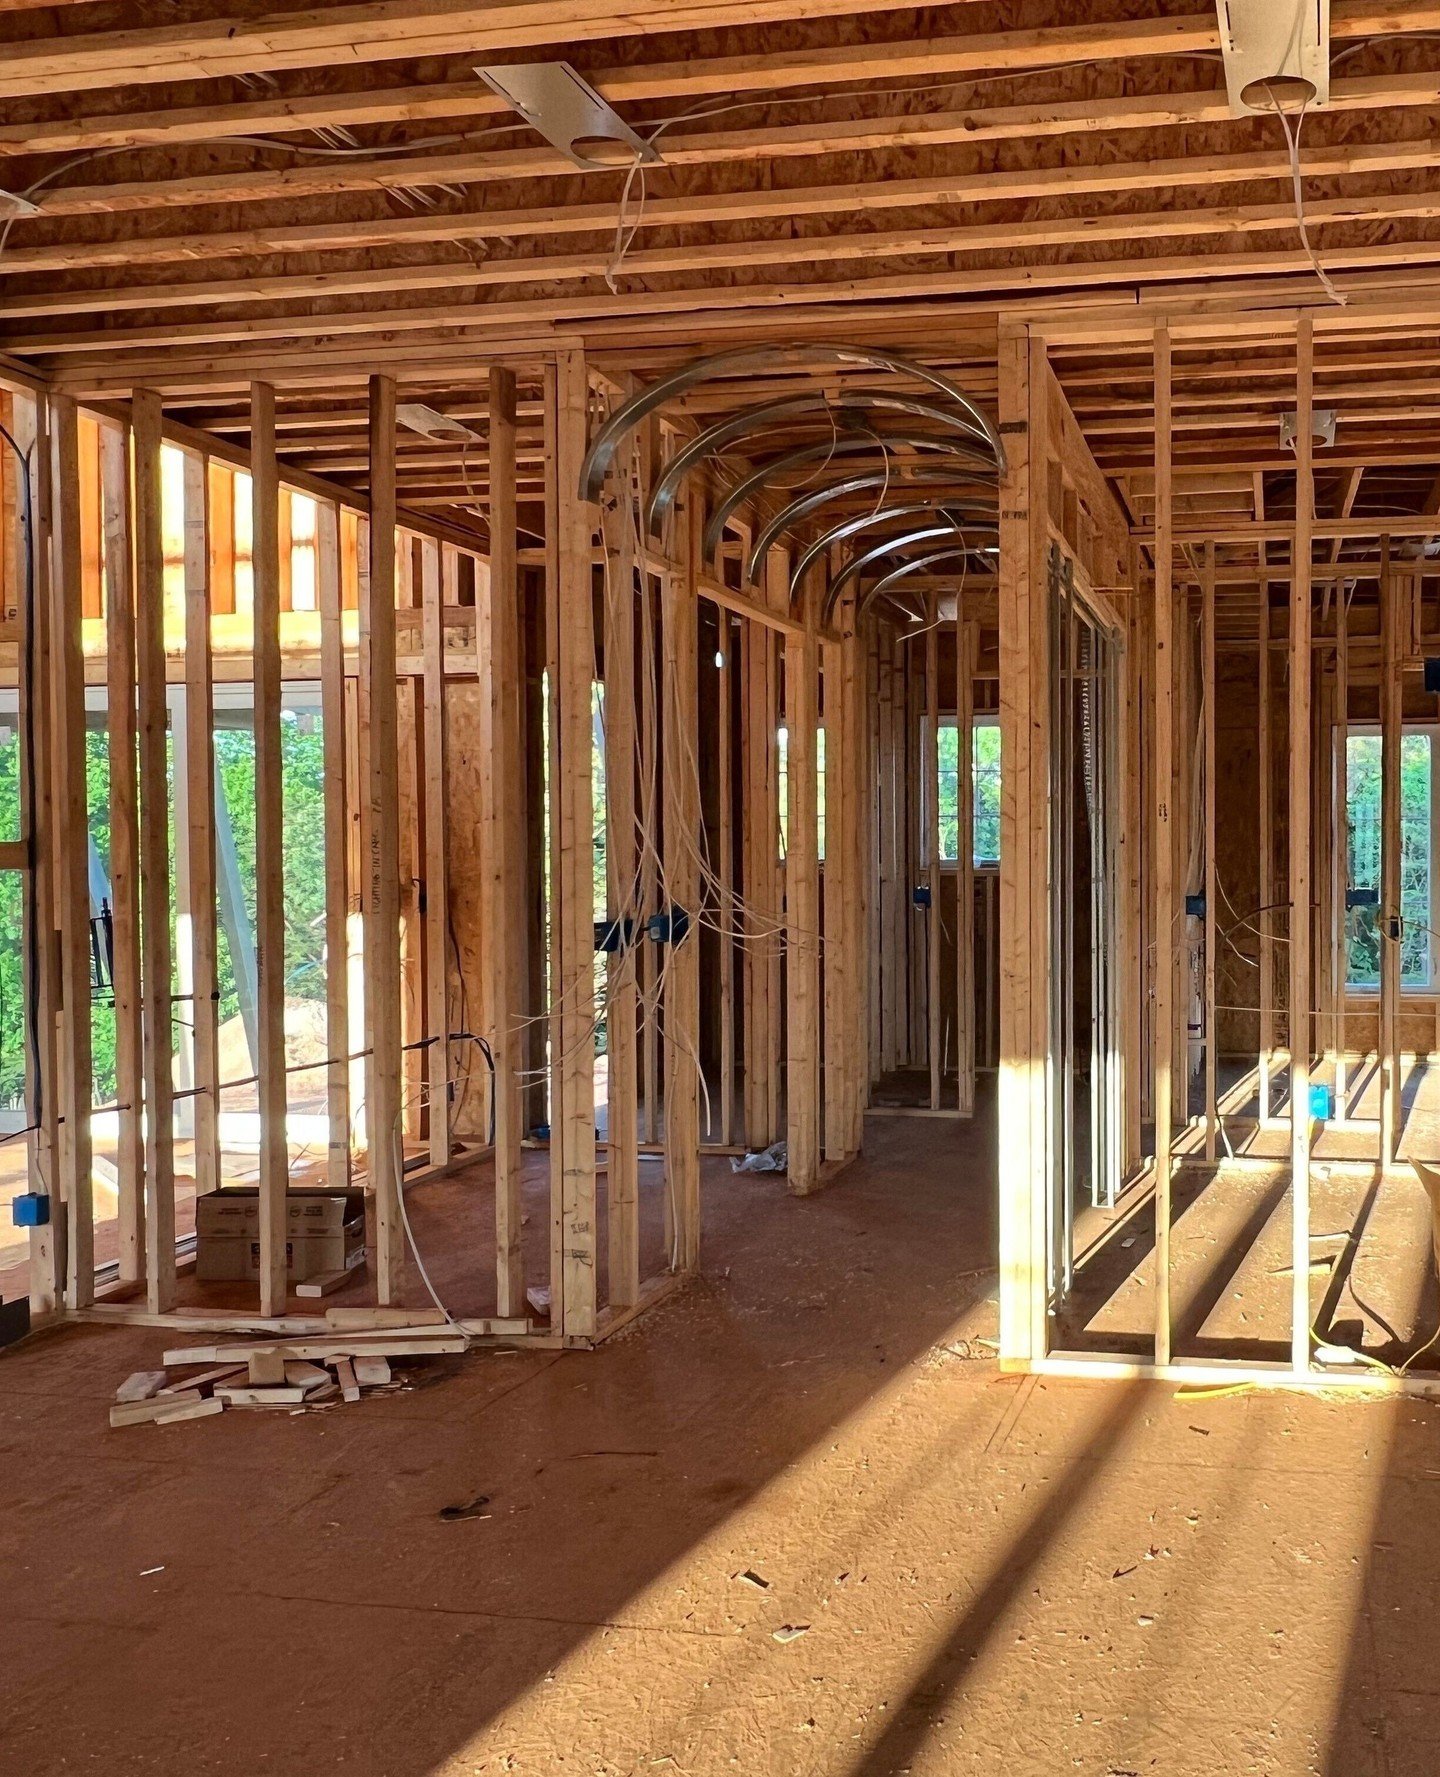 Progress Check at Mountain Manor Estate! We've got the barrel ceiling design framed in the hallways and are thrilled with the seamless design provided by Paragon Home Plans. Thanks to their expertise, we're ready for the next phase. This home is goin